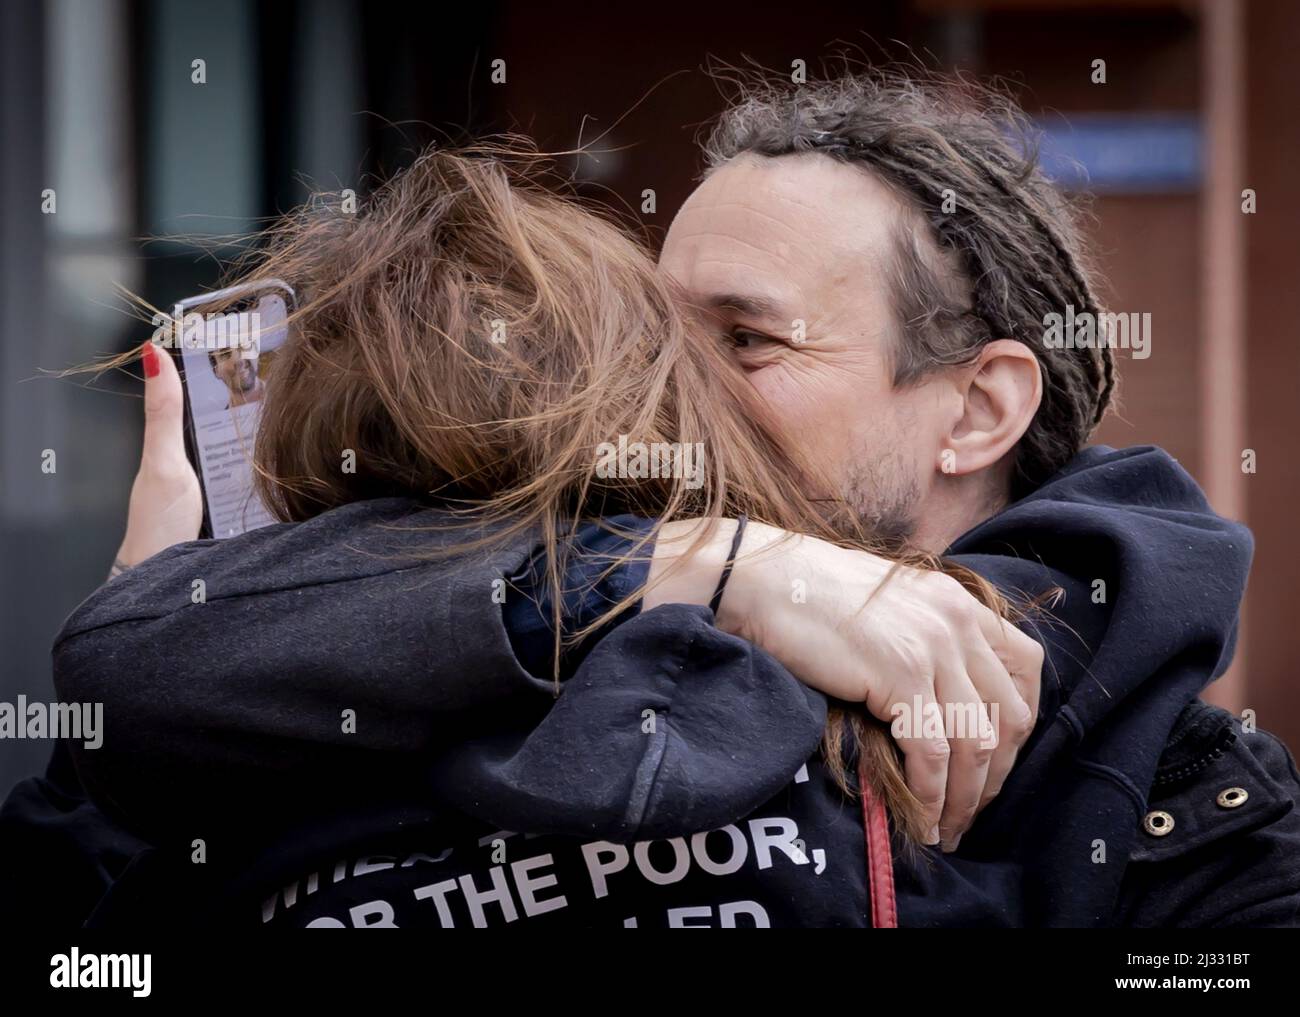 2022-04-05 14:30:08 ROTTERDAM - Willem Engel is welcomed by his girlfriend Dorien Rose leaves the court after his remand has been lifted. The foreman of Viruswaarheid was arrested again on April 3, after various media outlets published a conversation with Engel recorded in the studio of Café Weltschmerz. Engel's pre-trial detention was suspended on the condition that he would not make any statements on social media. ANP ROBIN VAN LONKHUIJSEN netherlands out - belgium out Stock Photo